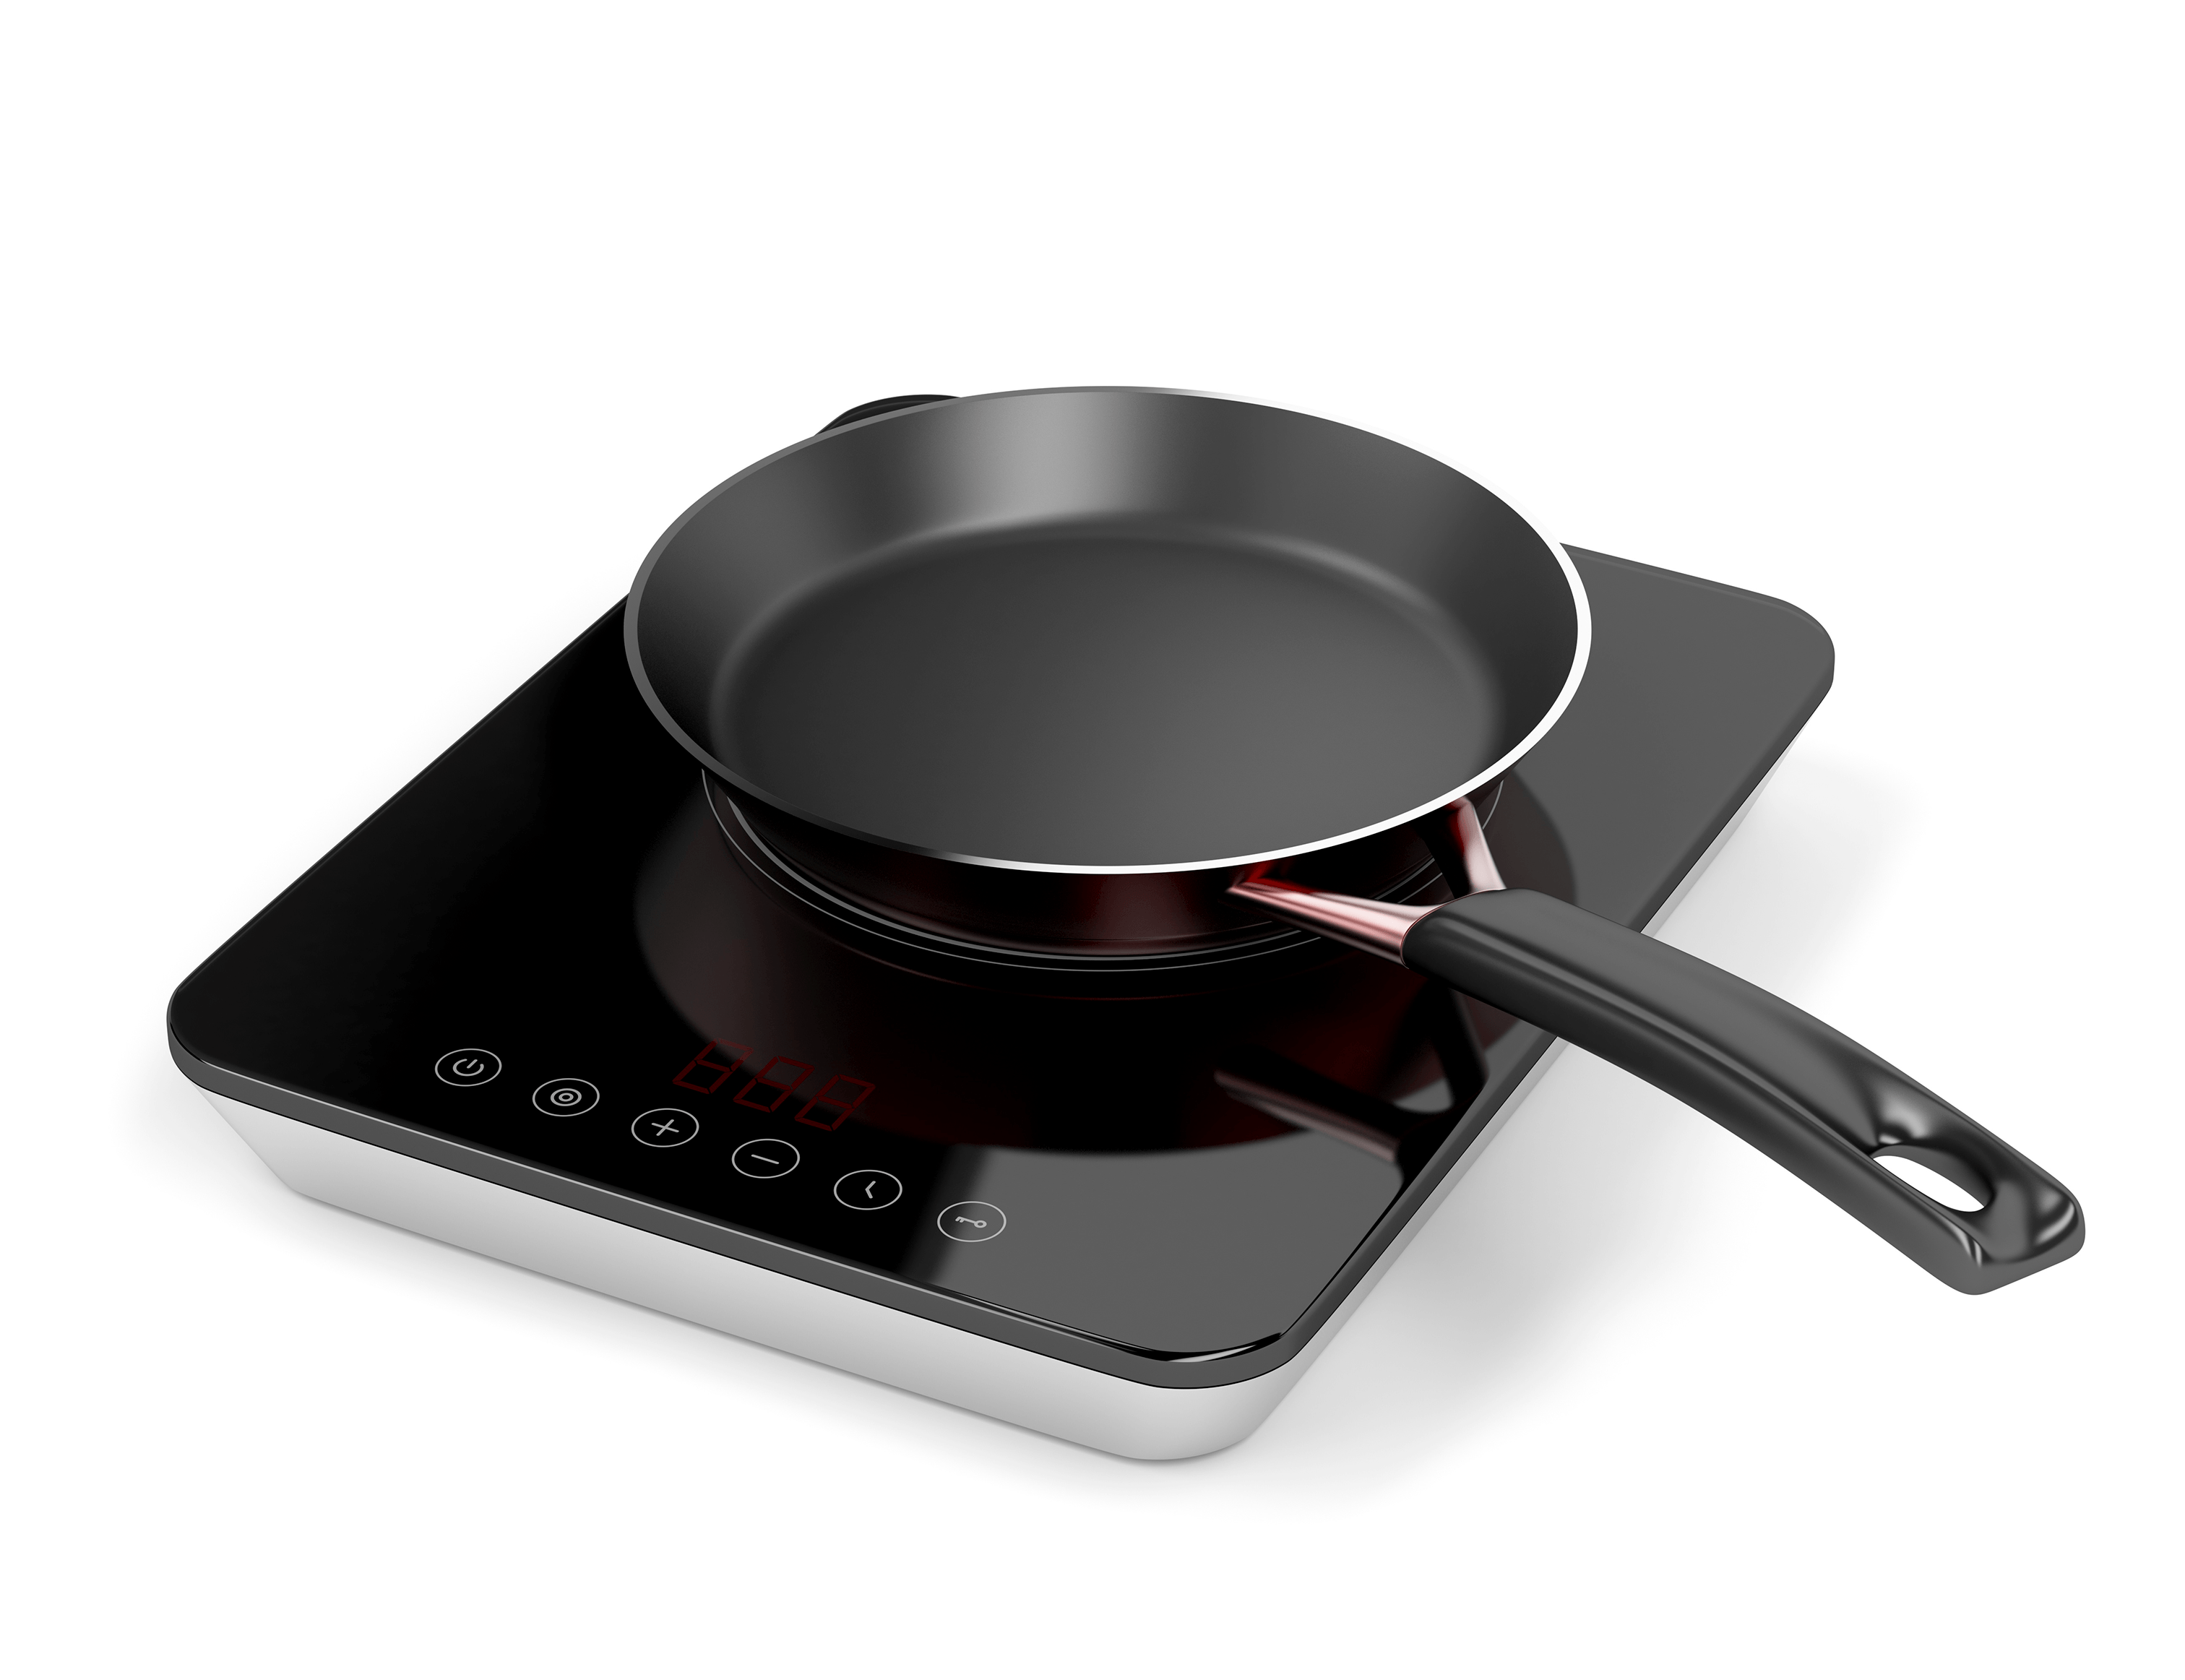 Image of a portable induction cooktop unit